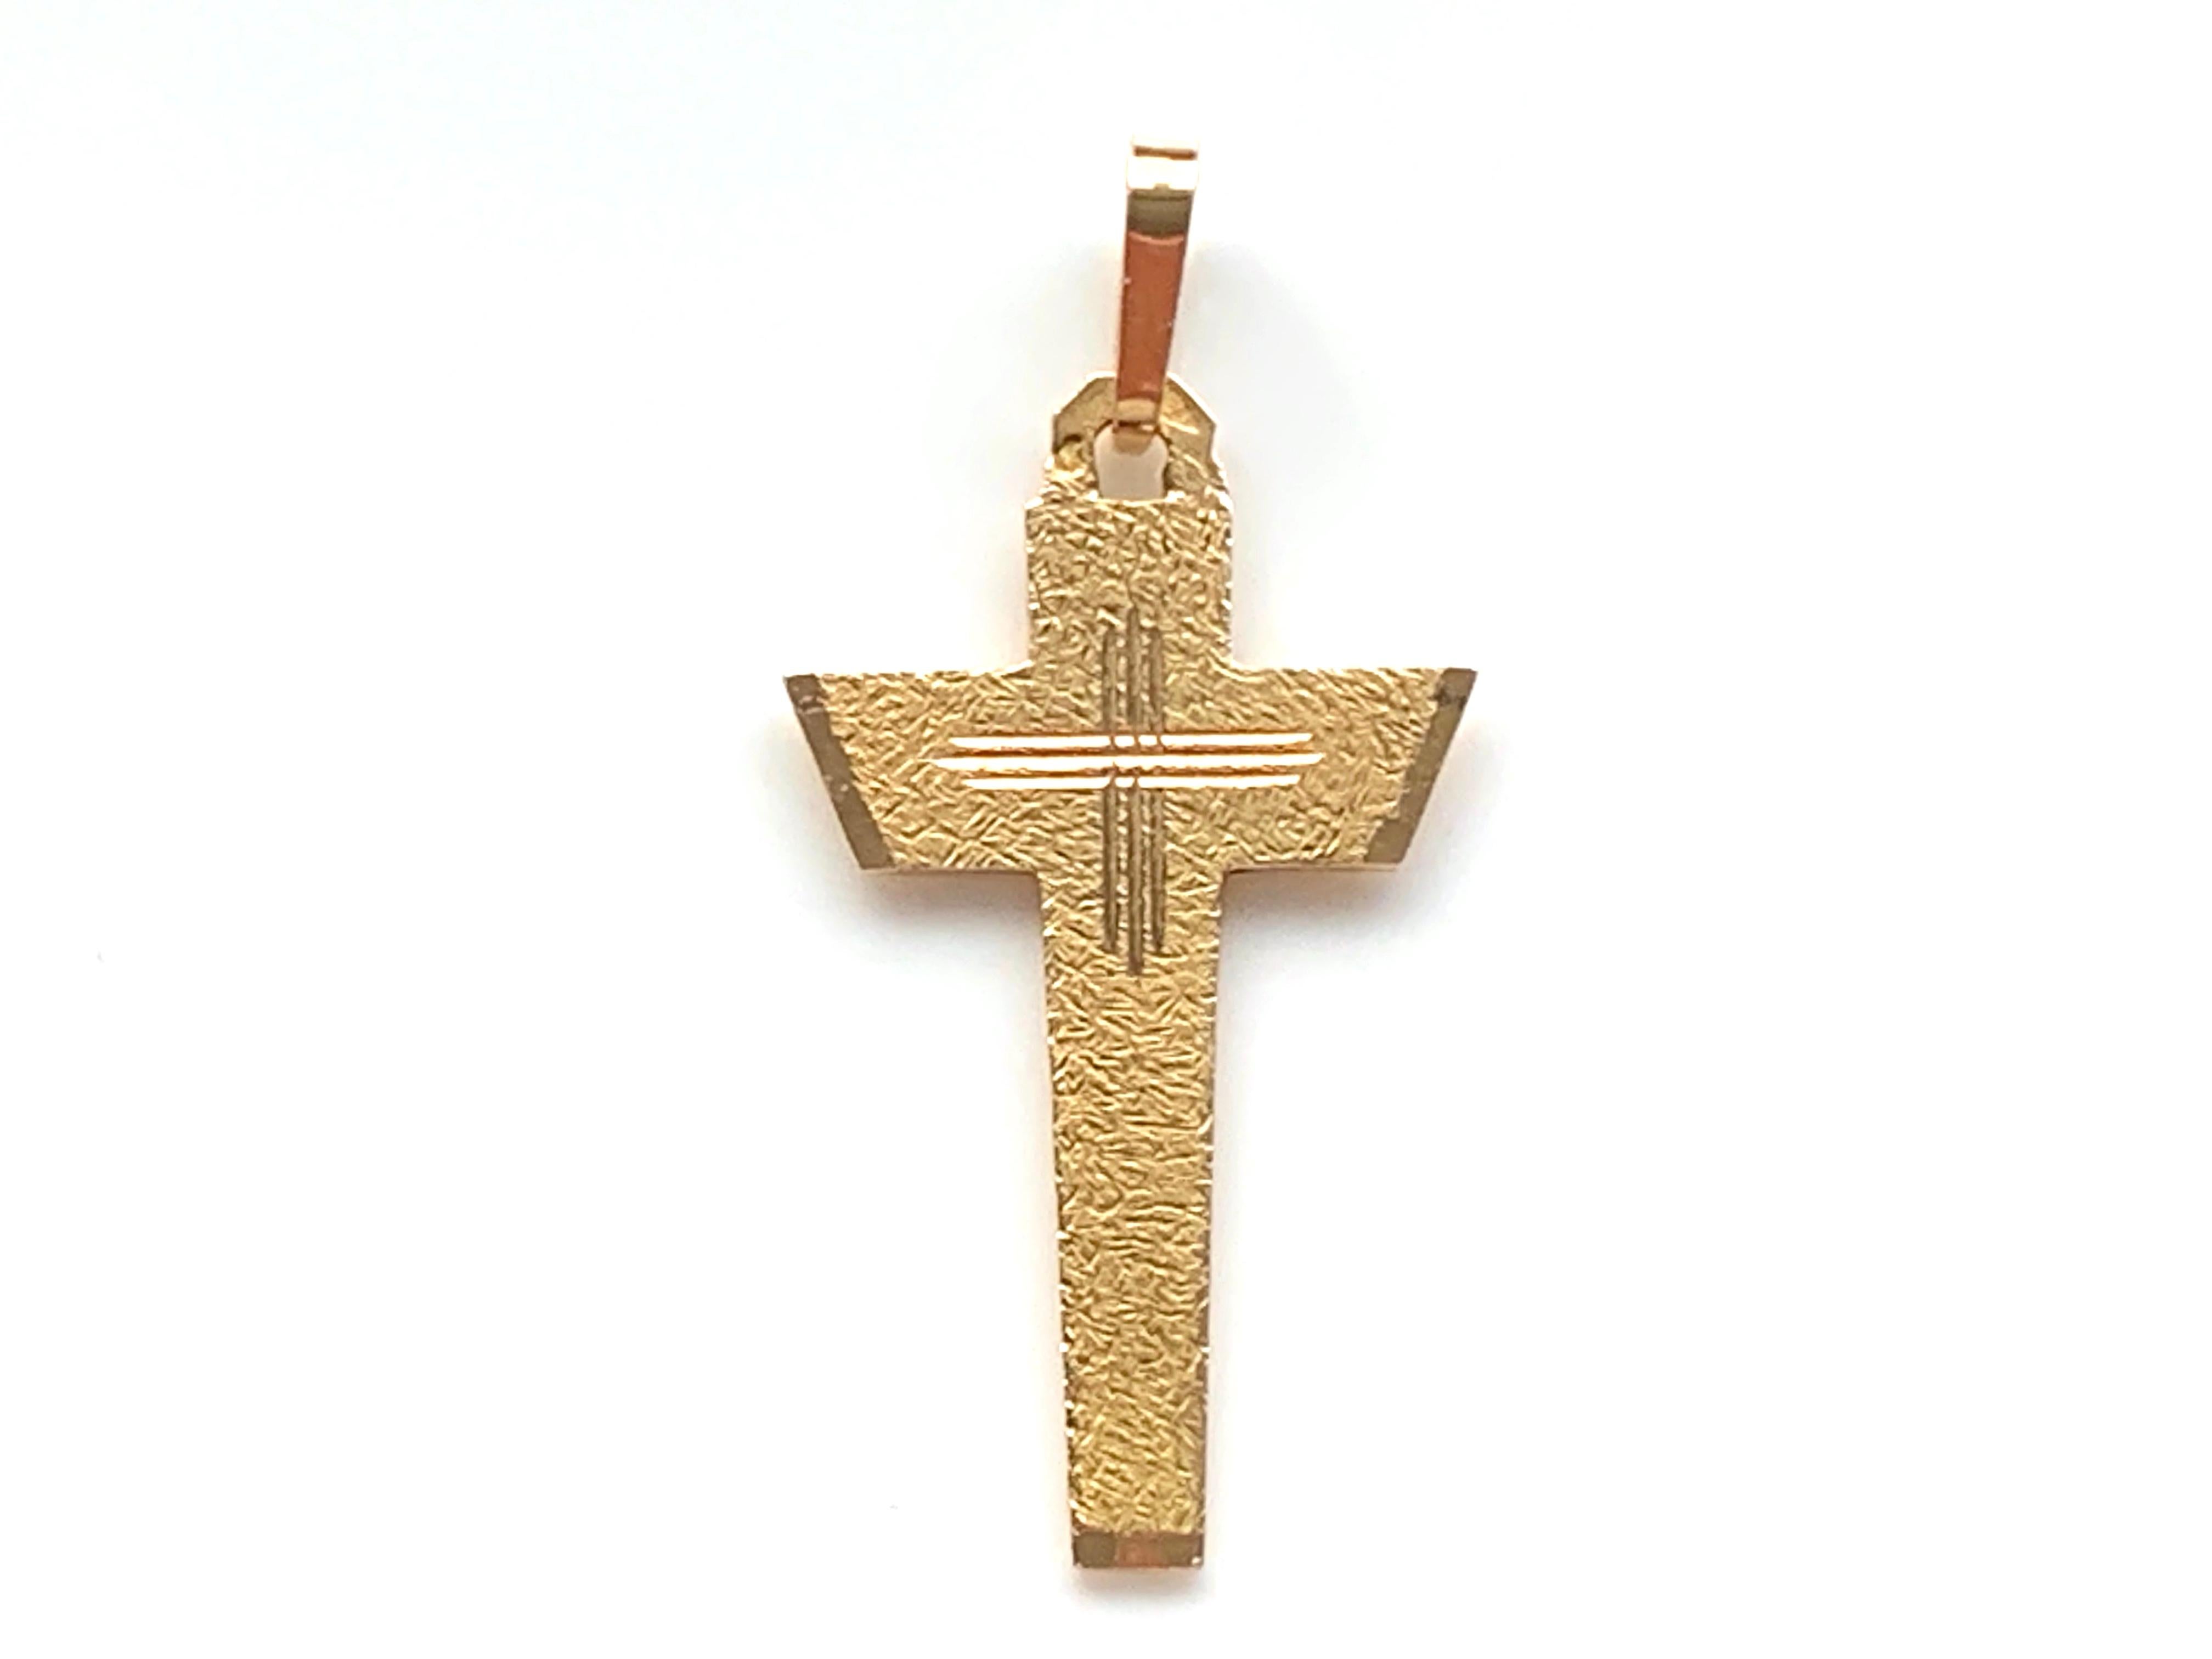 Stunning Late Mid Century  1970s
18ct Gold Modernist Cross
with beautiful textural front
French eagle head - and makers mark
to Bail.
Size 4cm x 2cm (at widest Point { Incl : Bail })


